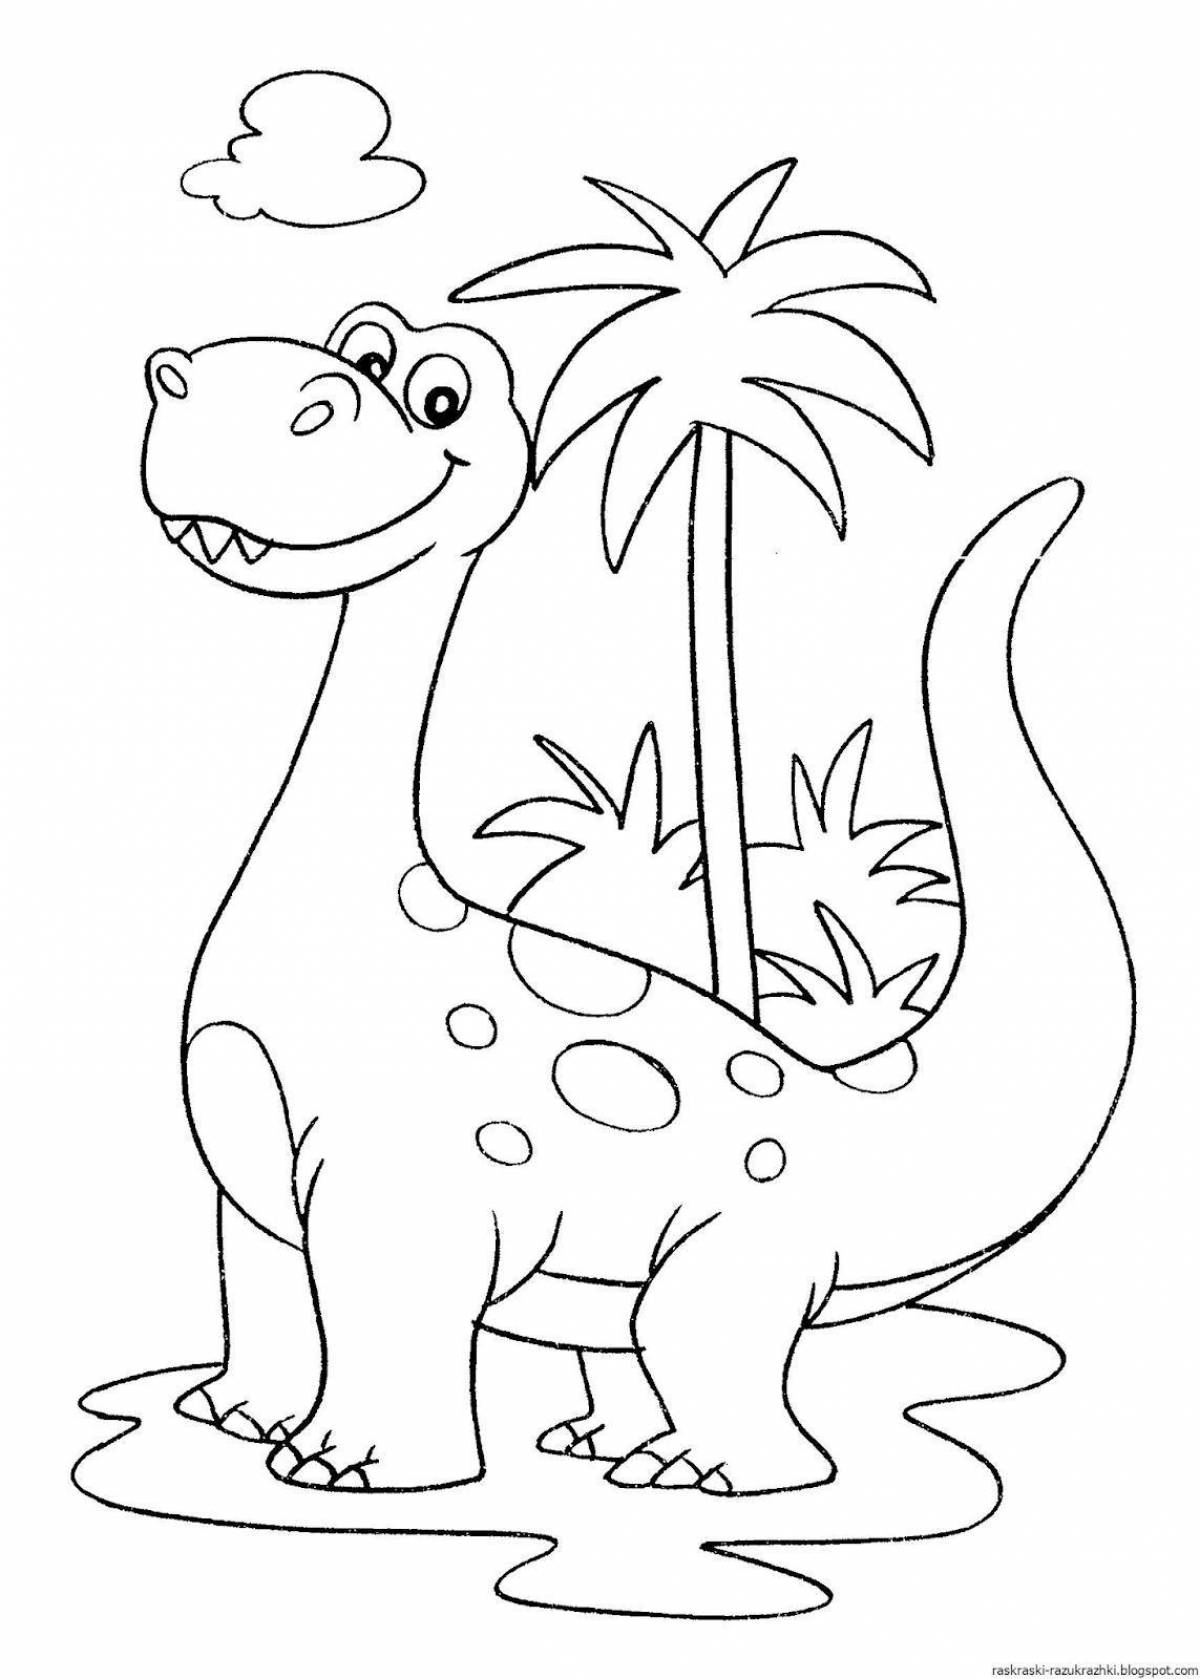 Outstanding dinosaur coloring page for kids